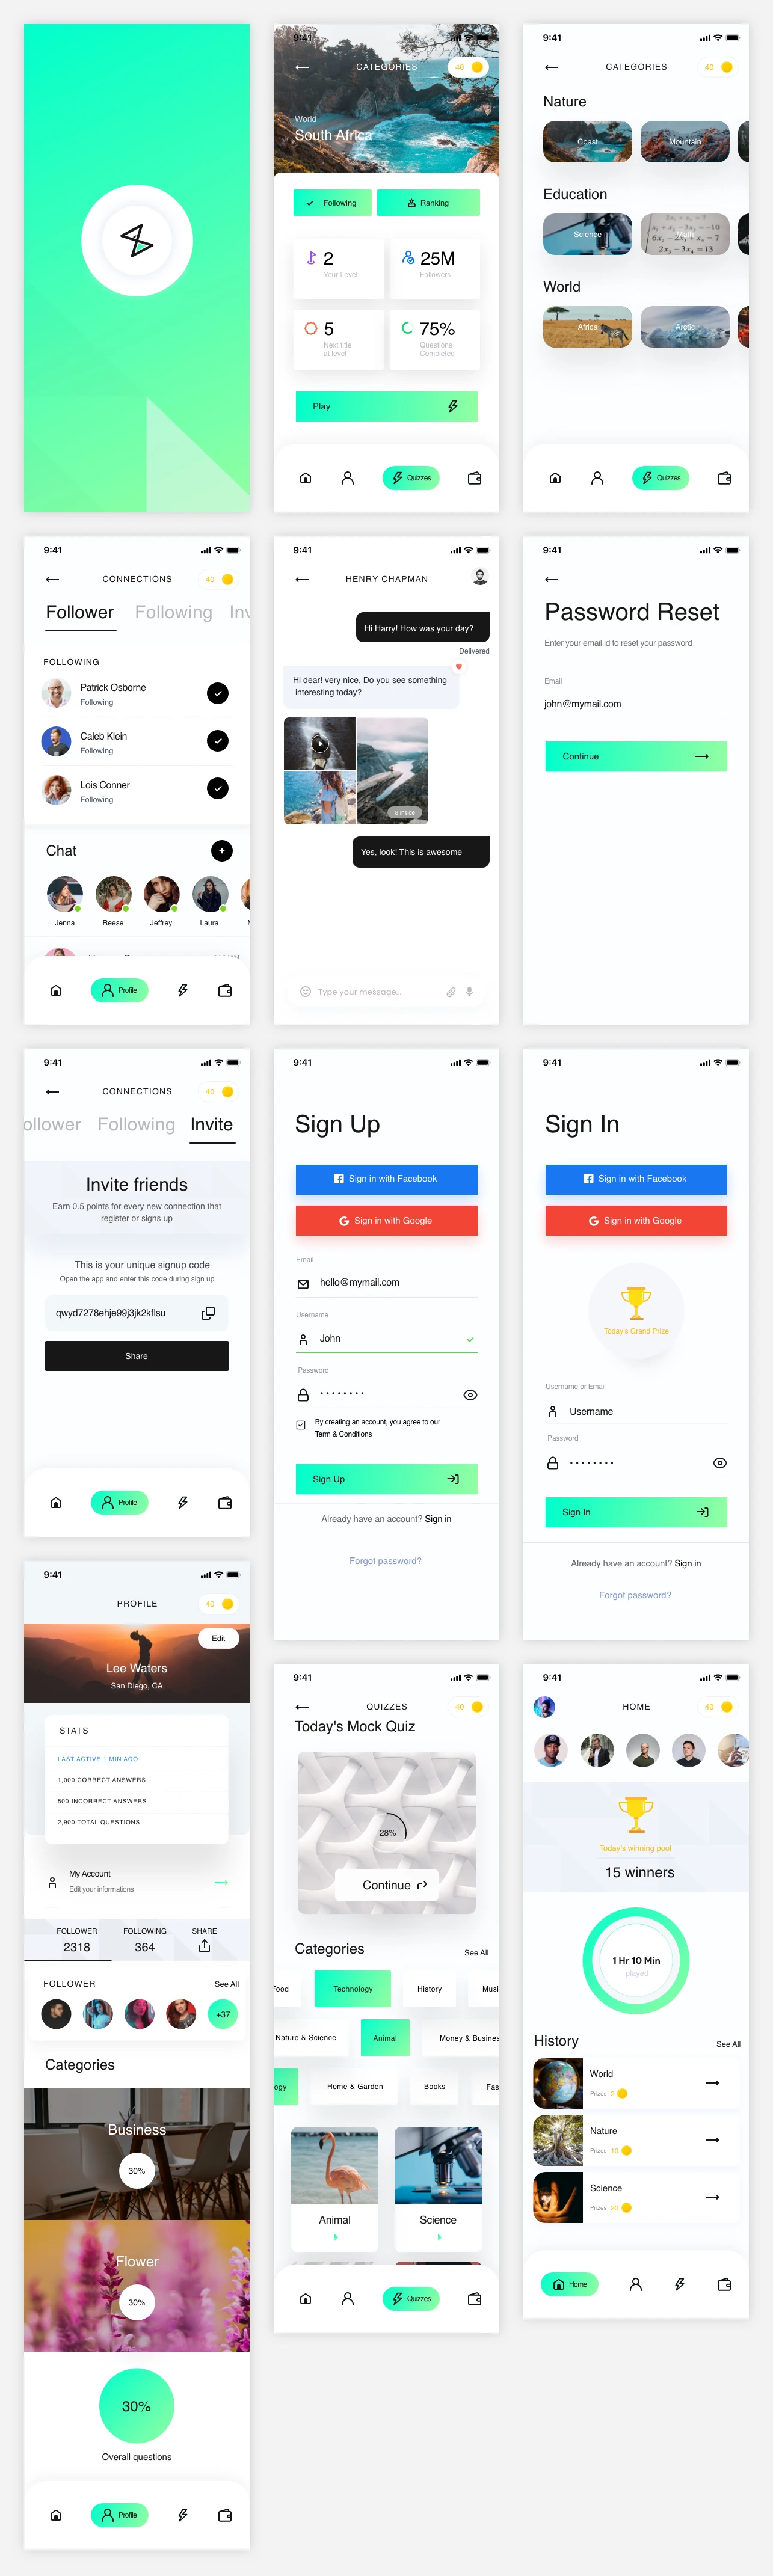 Trivia App Free UI Kit for Adobe XD - Trivia App is free mobile UI Kit designed exclusively for Adobe XD. It features 25+ mobile screen pages to get you started on your projects.